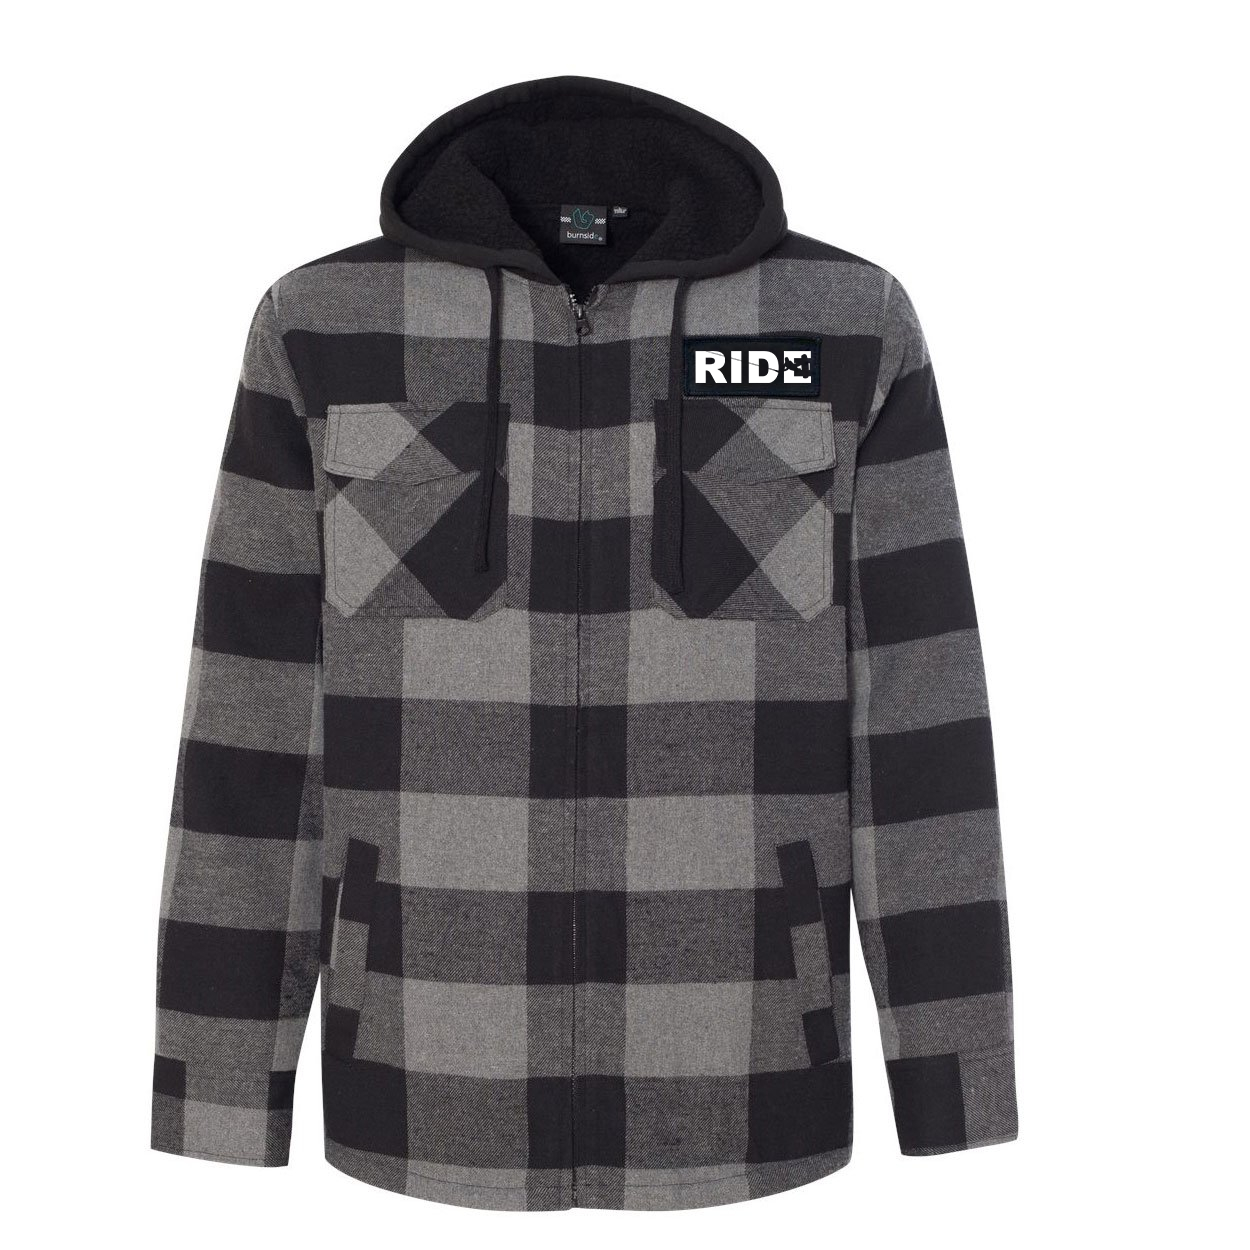 Ride Wakeboard Logo Classic Unisex Full Zip Woven Patch Hooded Flannel Jacket Black/Gray (White Logo)